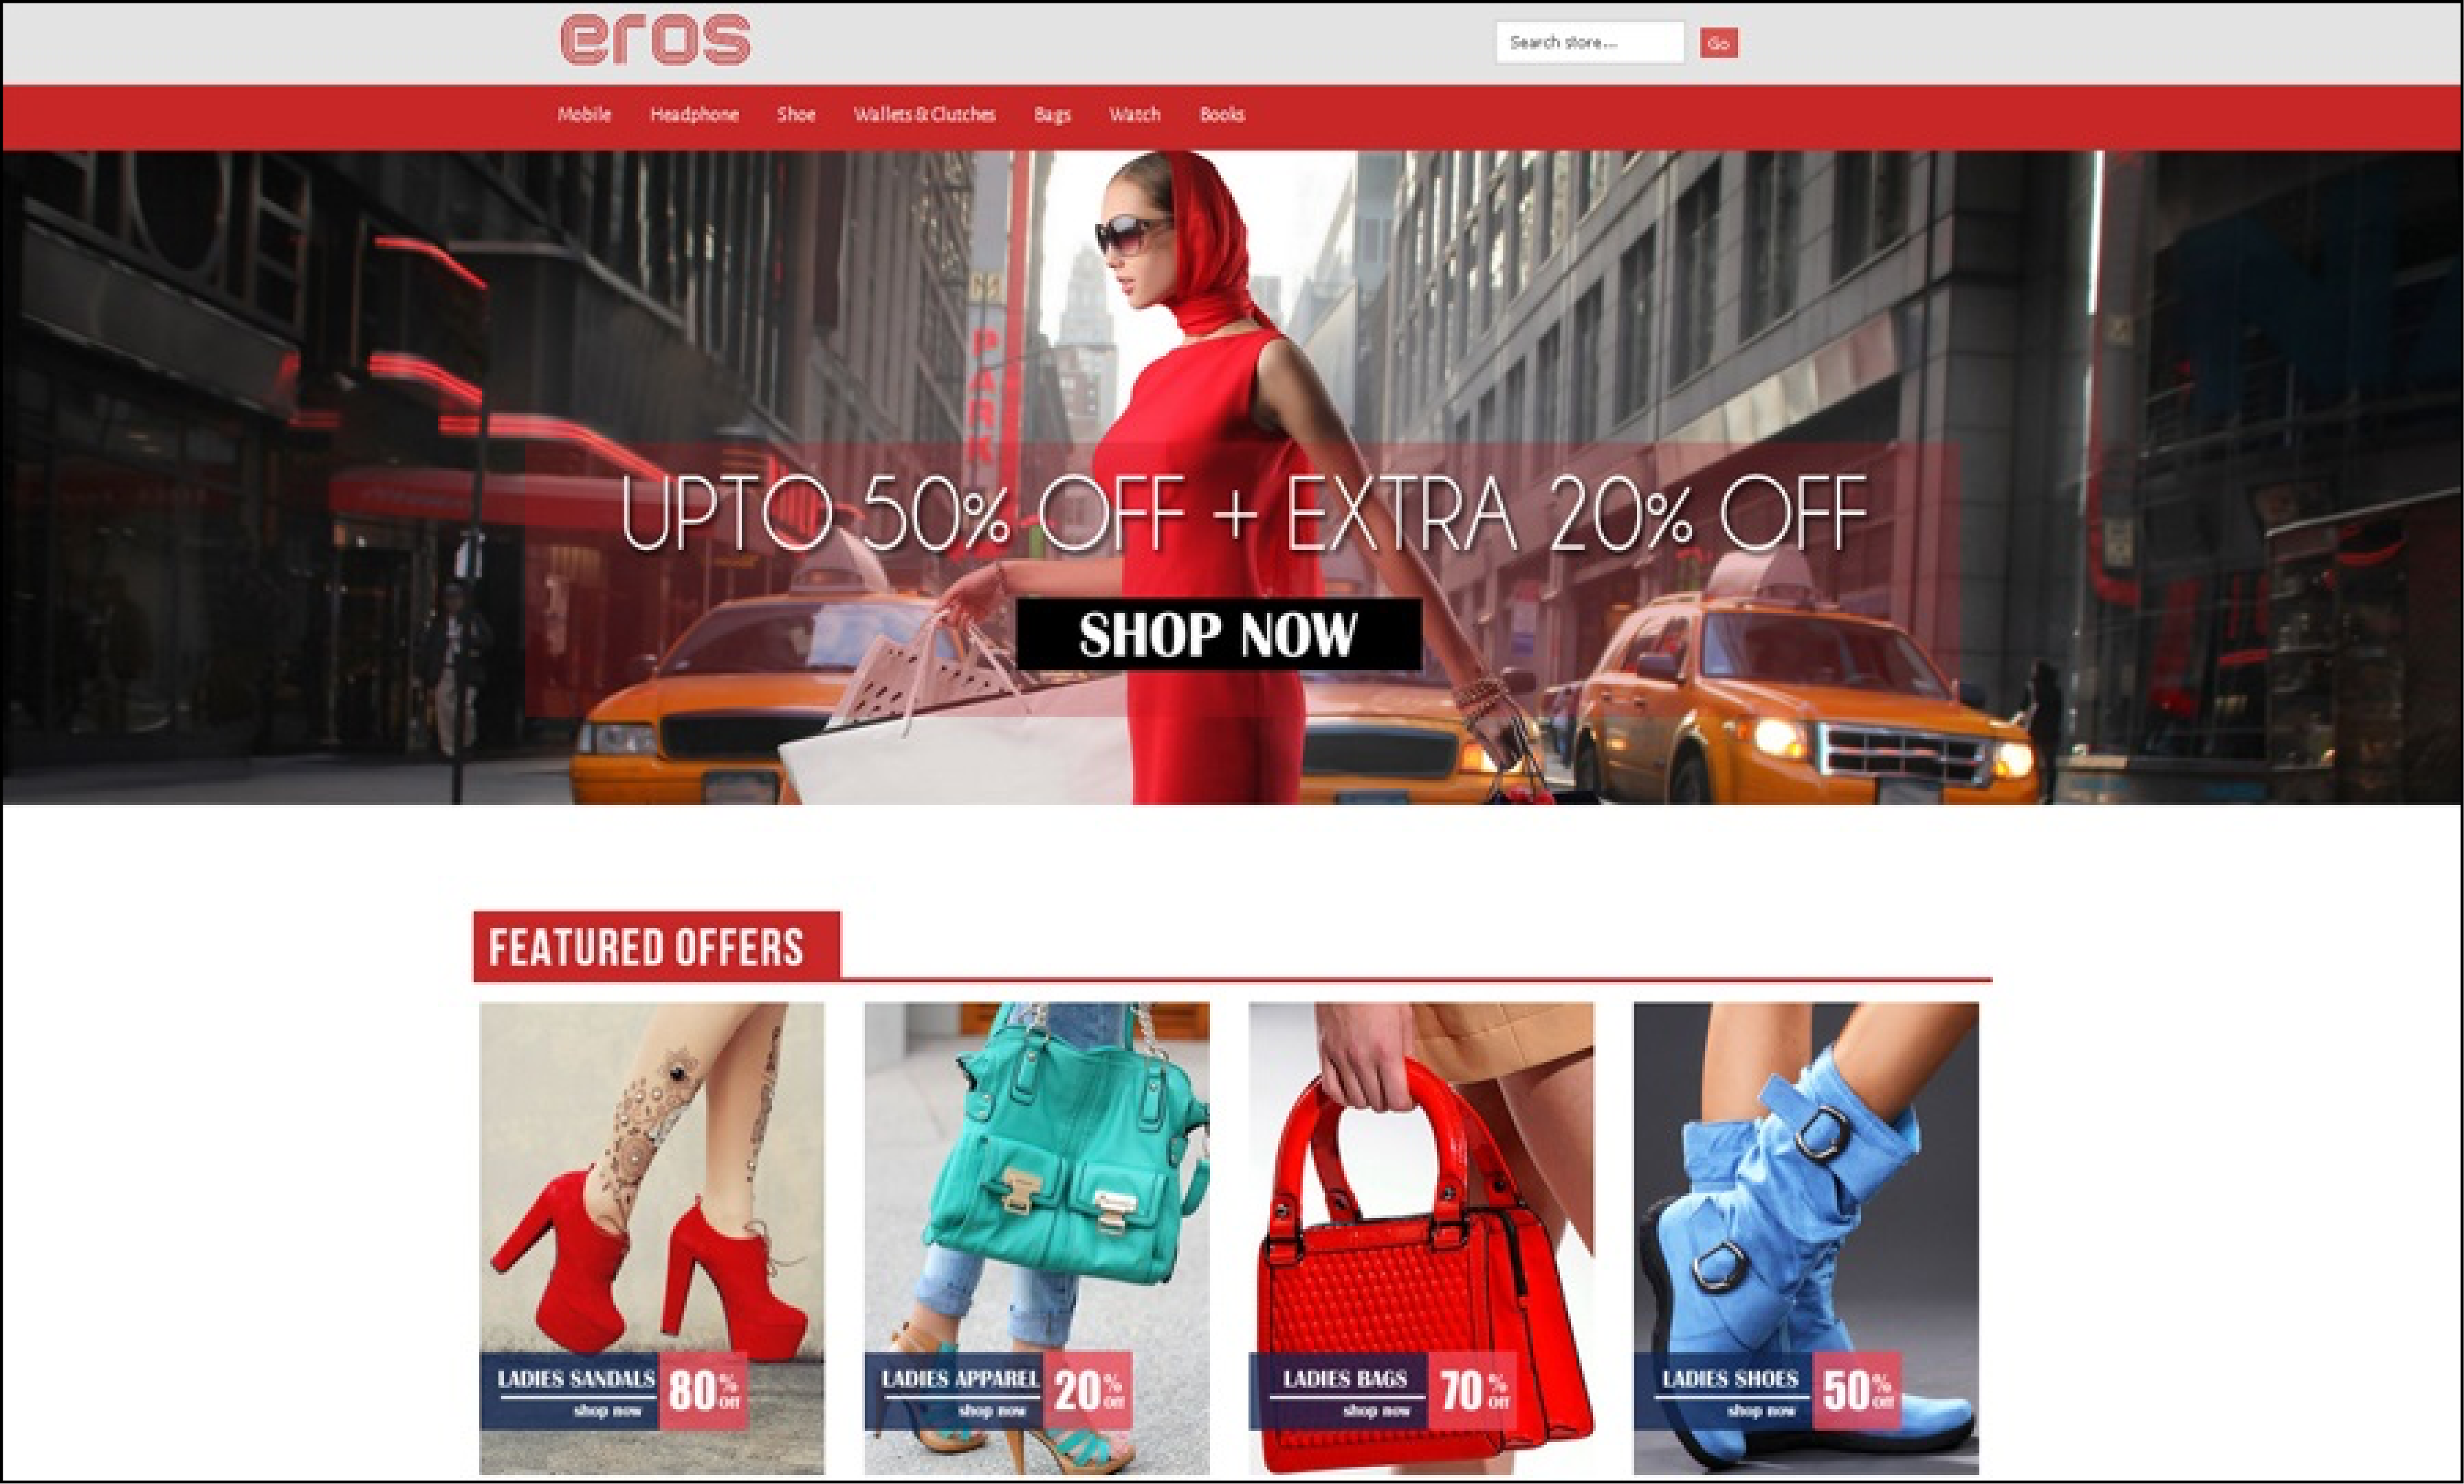 20+ Best Magento Themes and Templates -Eros